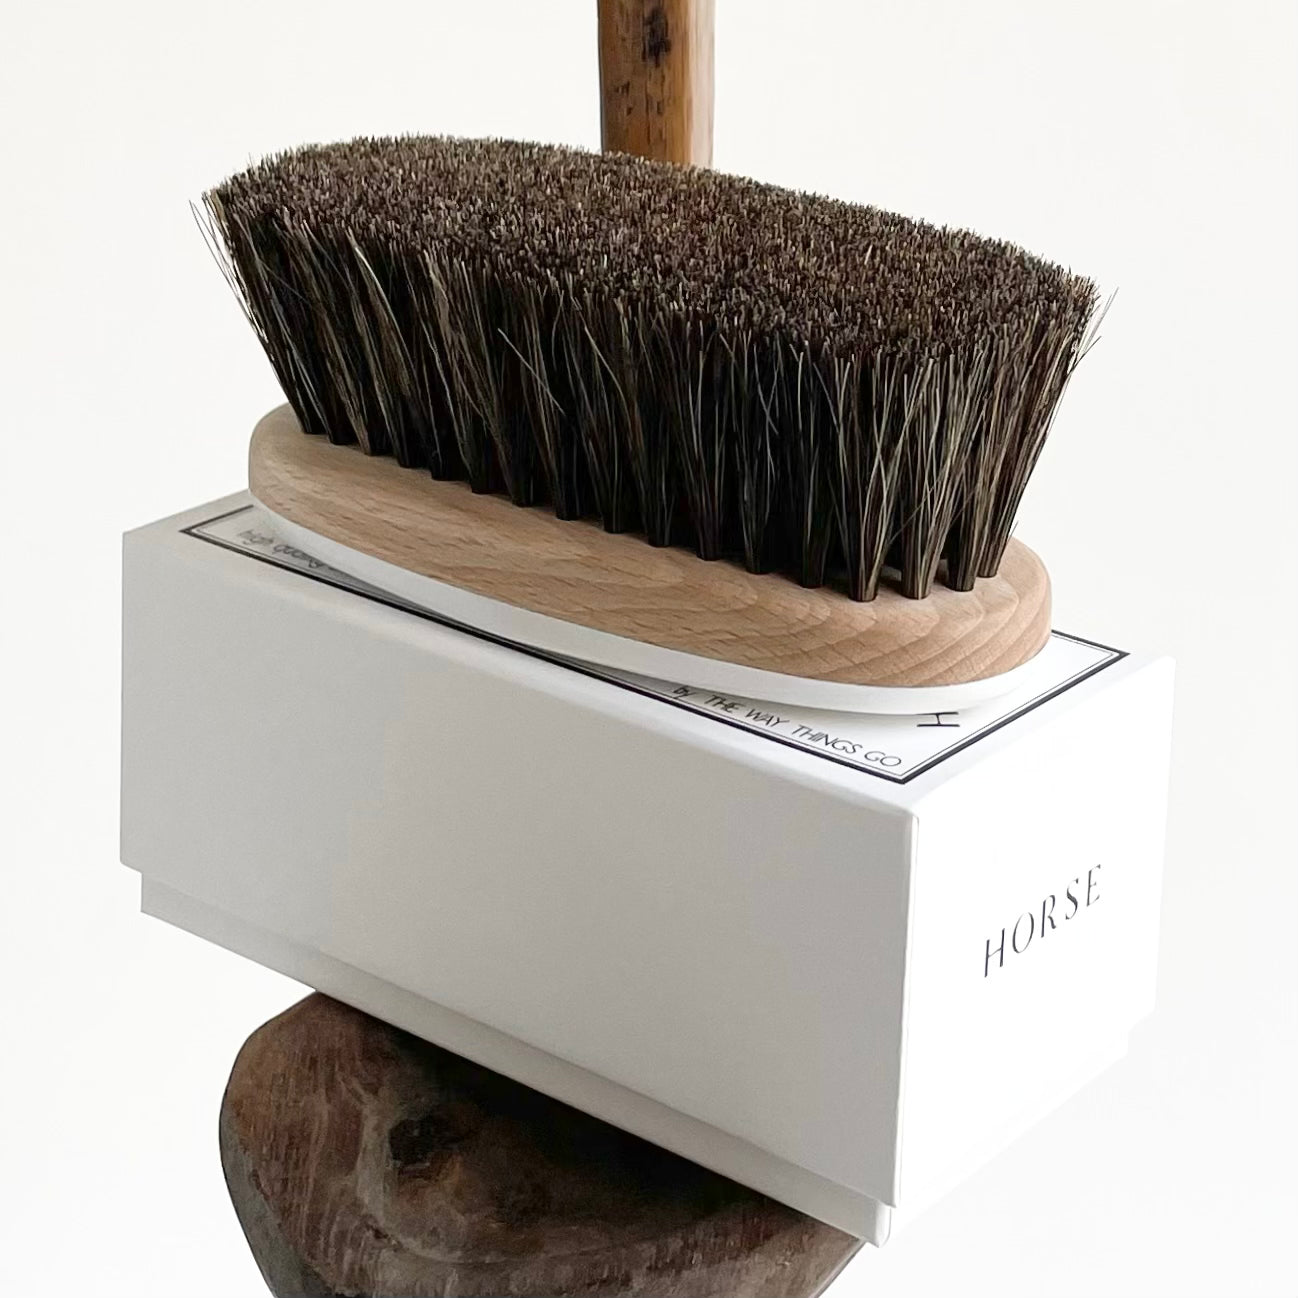 ANATOMICA KOBE SHOES BRUSH by THE WAY THINGS GO